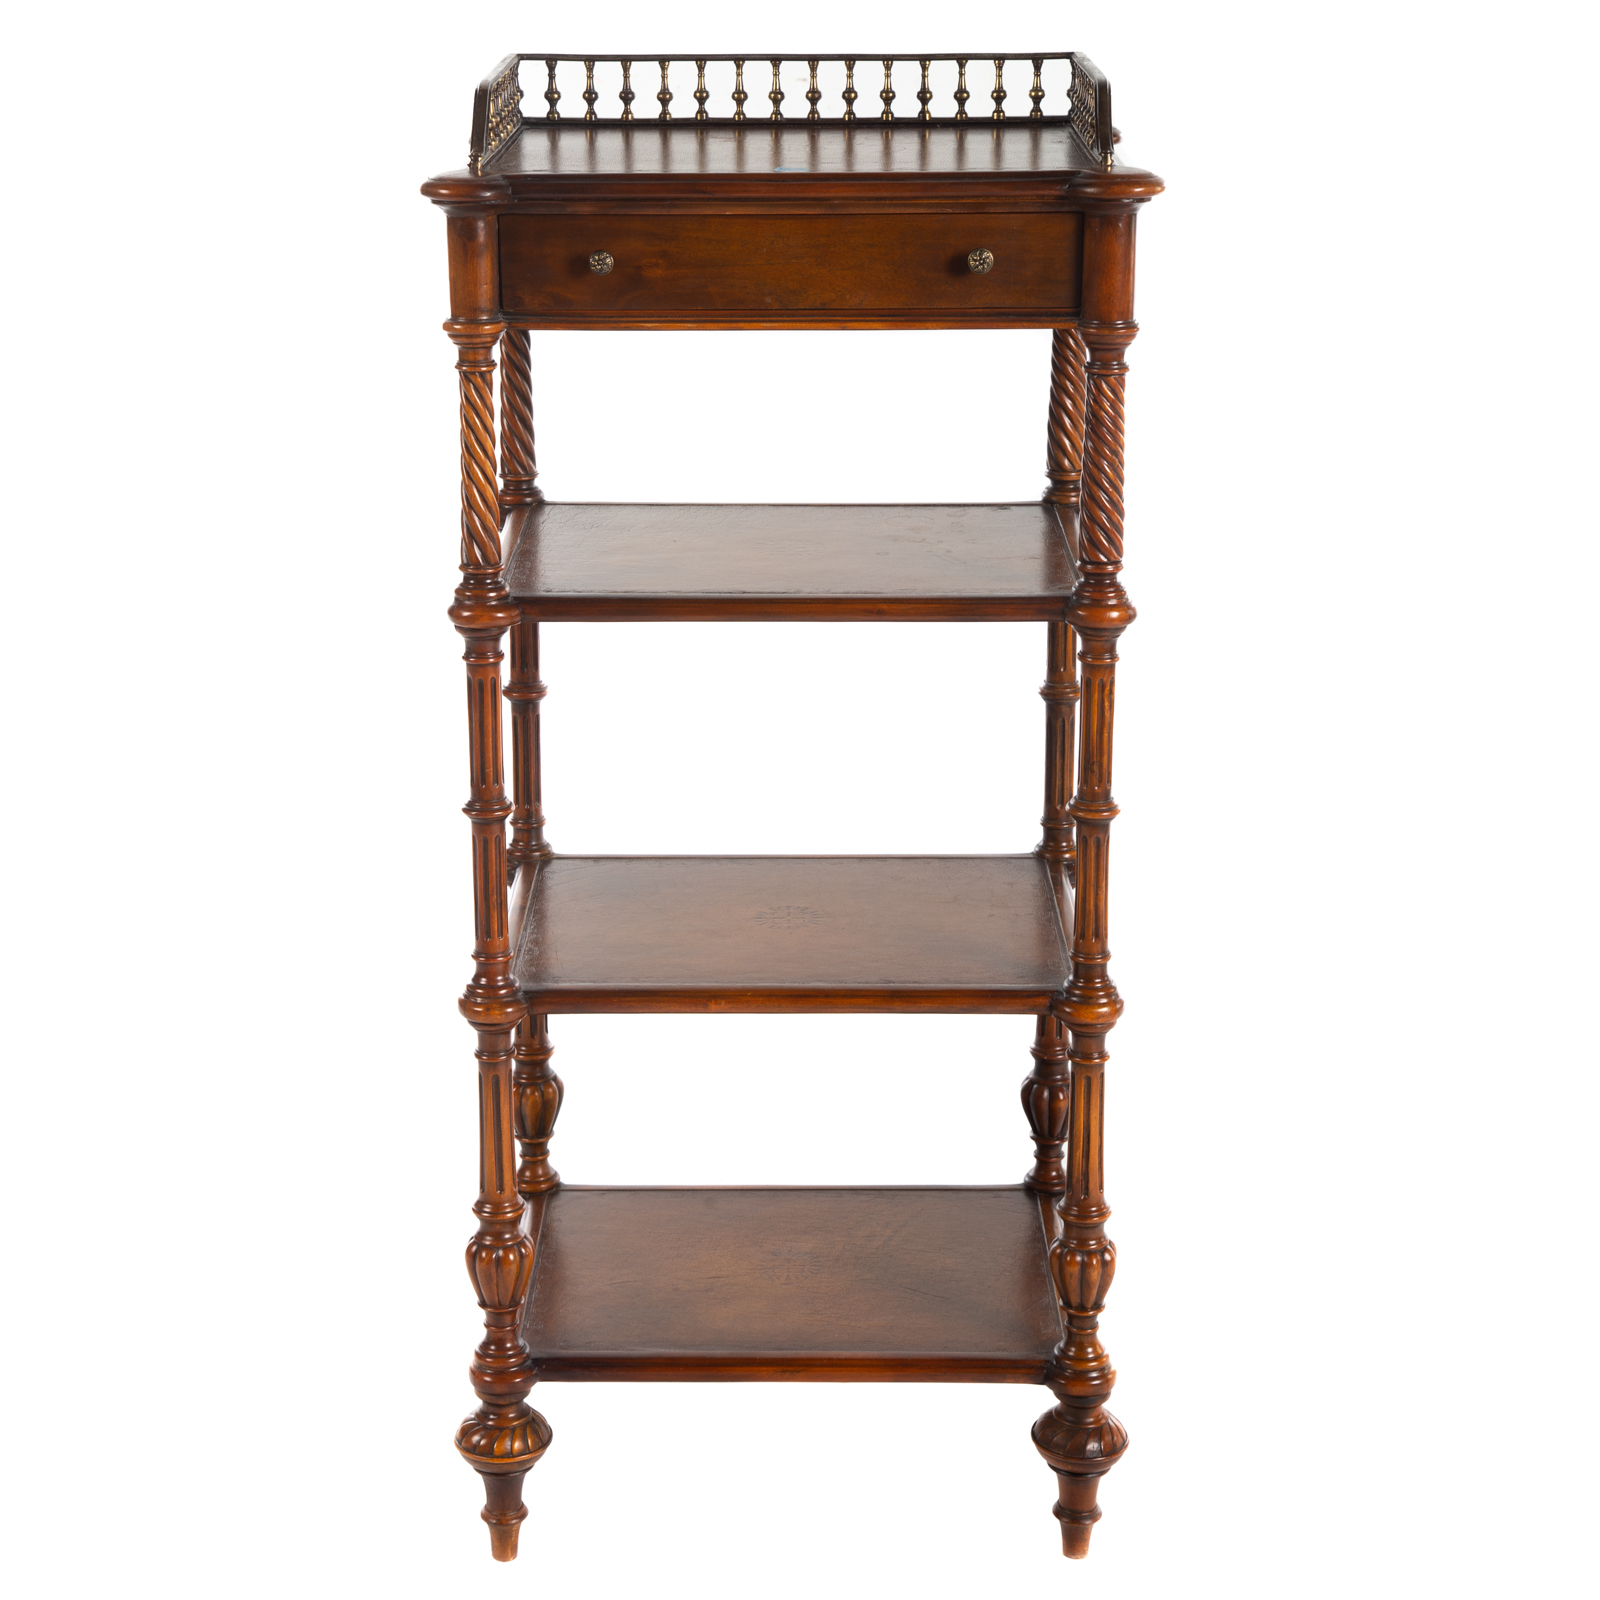 REGENCY STYLE LEATHER TOP ETAGERE